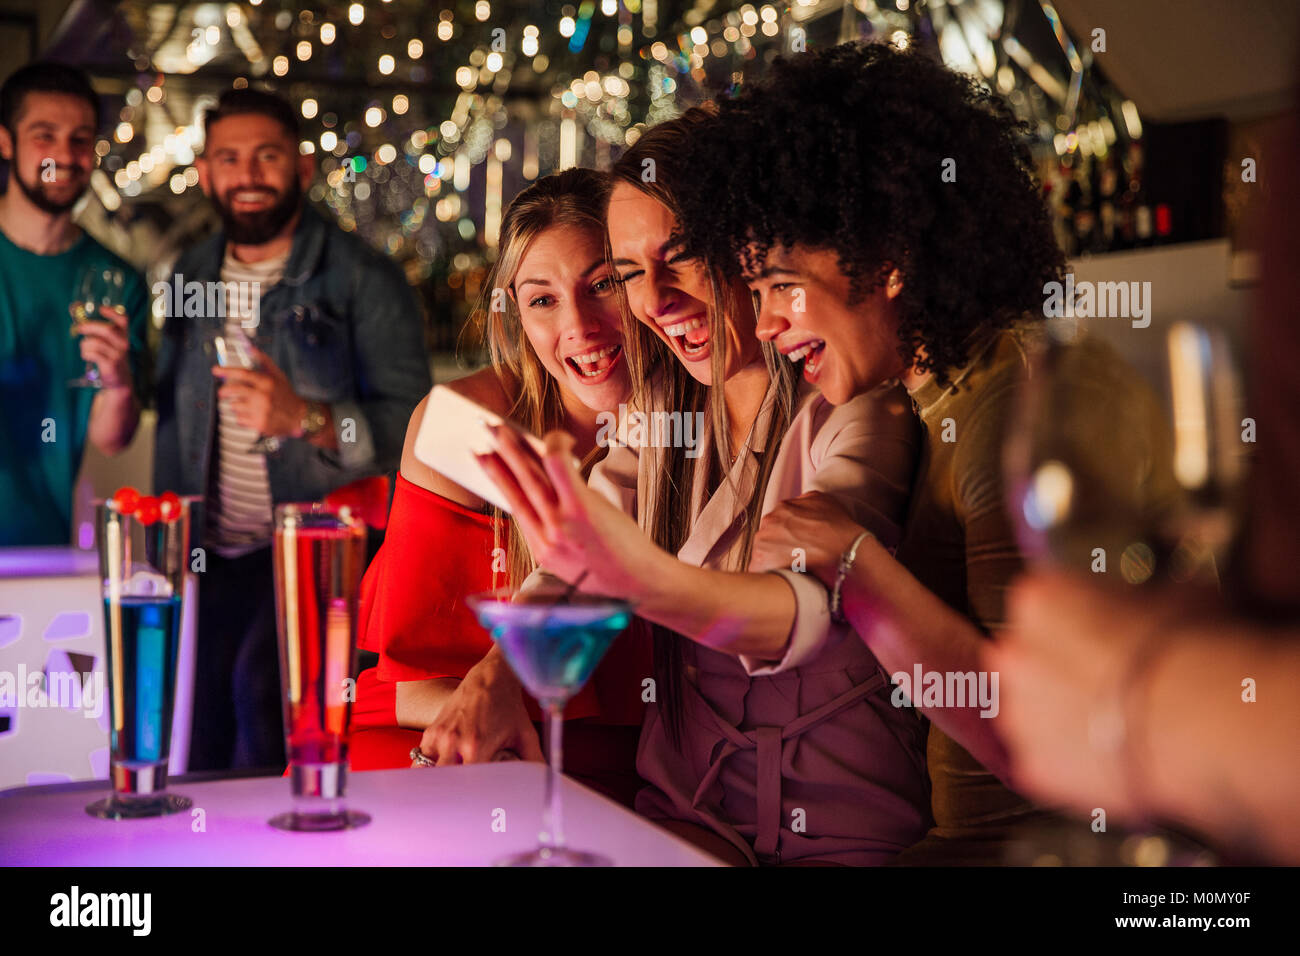 Three women are taking selfies together on a smartphone while enjoying drinks in a night club. Stock Photo